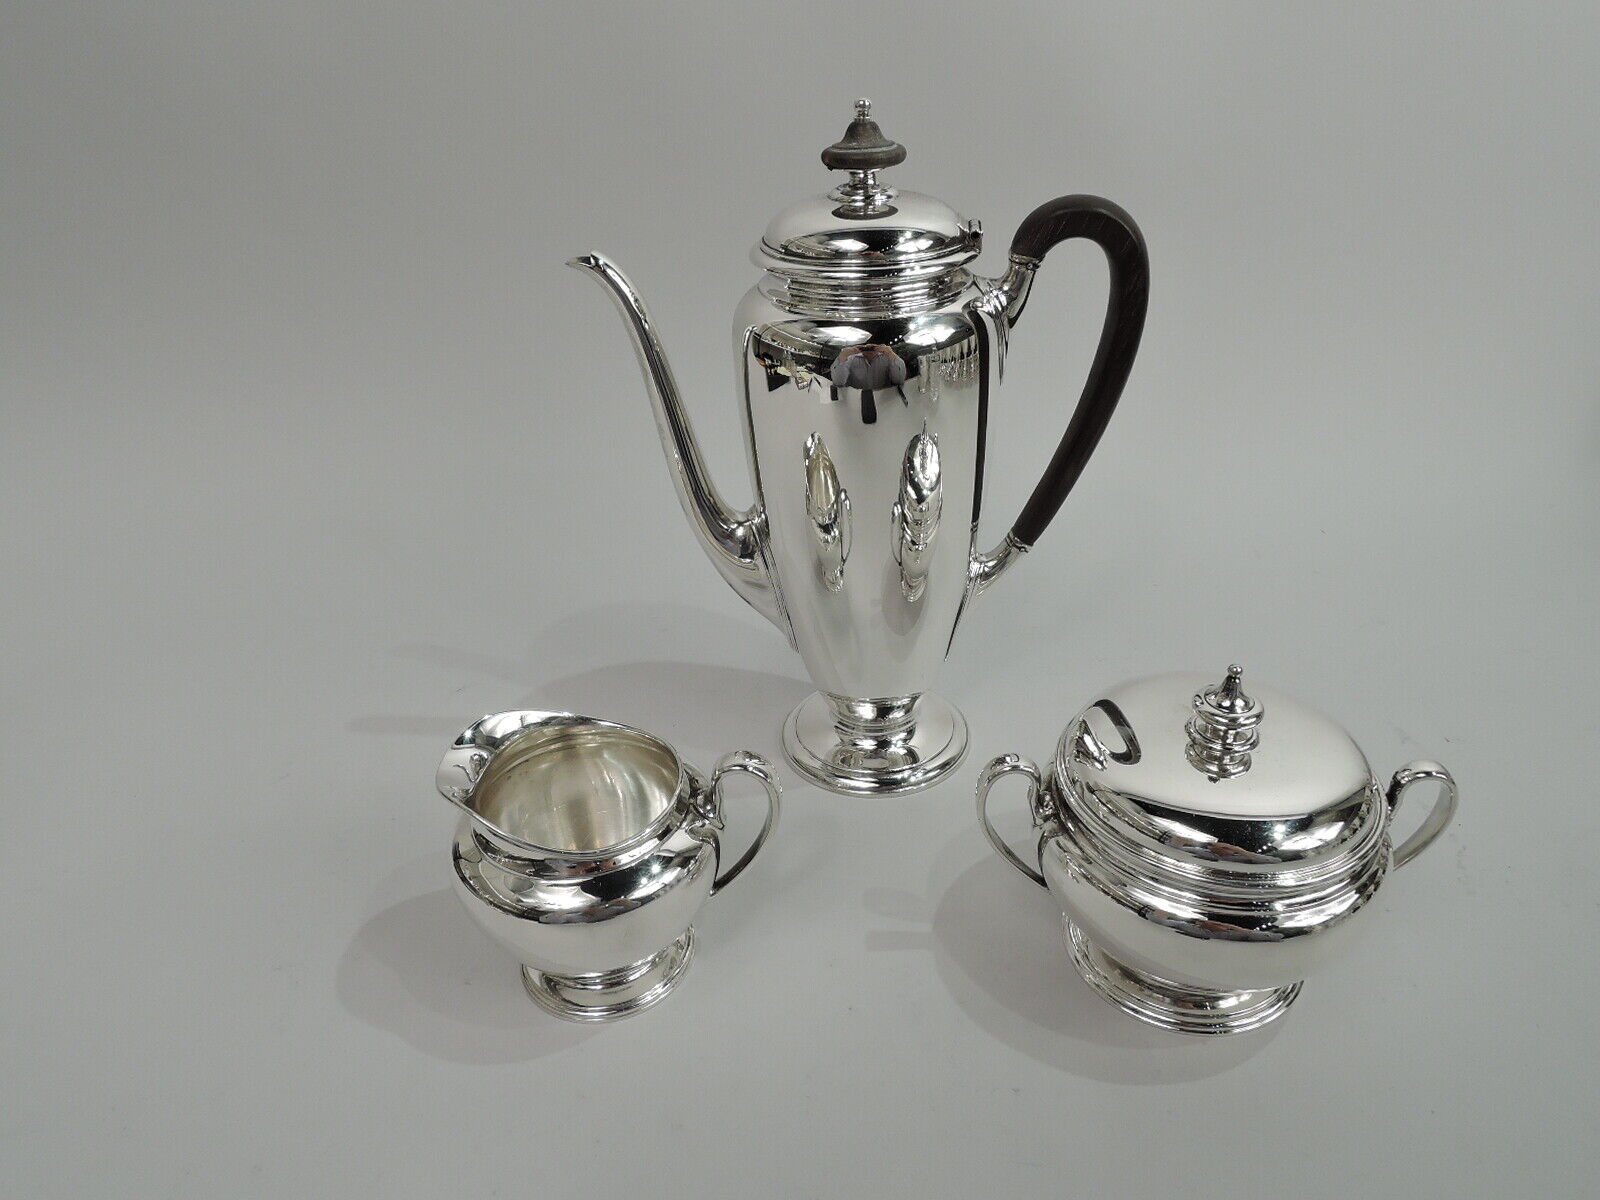 Tiffany Coffee Set 20638 20639 Antique Traditional American Sterling Silver  Tiffany & Co.